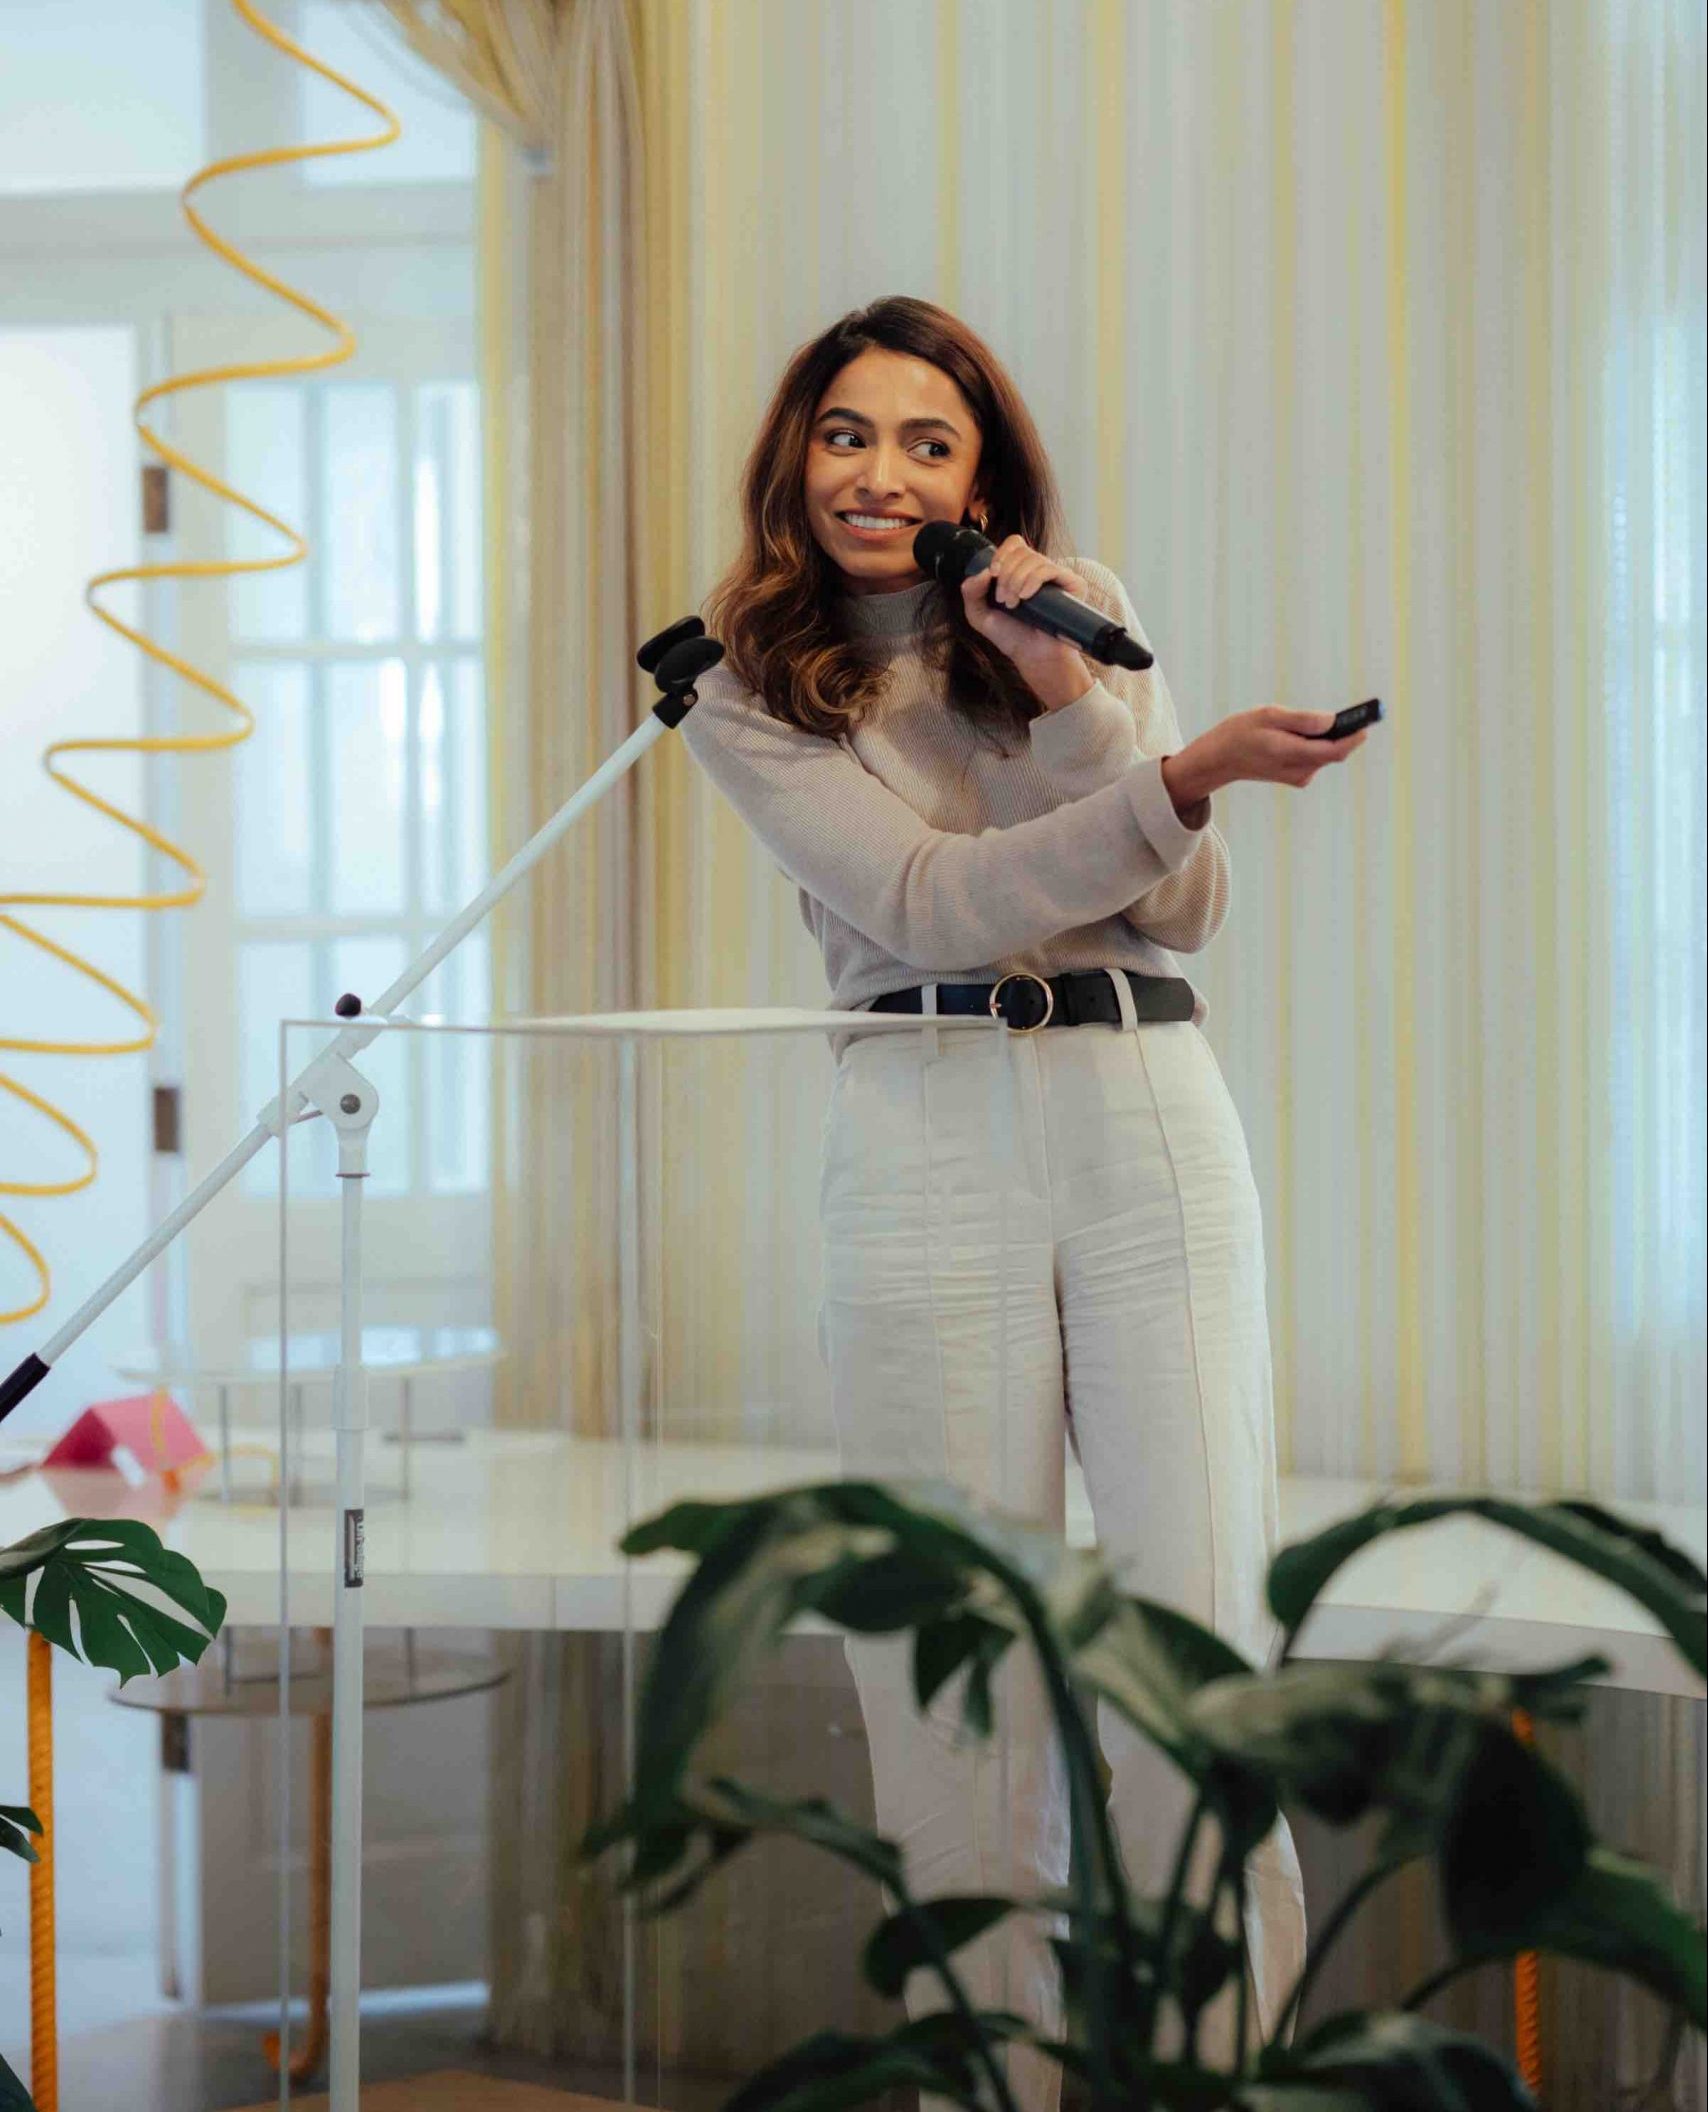 Pillars Artist Fellow Aqsa Altaf wearing a beige mock-neck sweater and linen pant smiles and holds a microphone in one hand while holding up a presentation clicker in her other hand